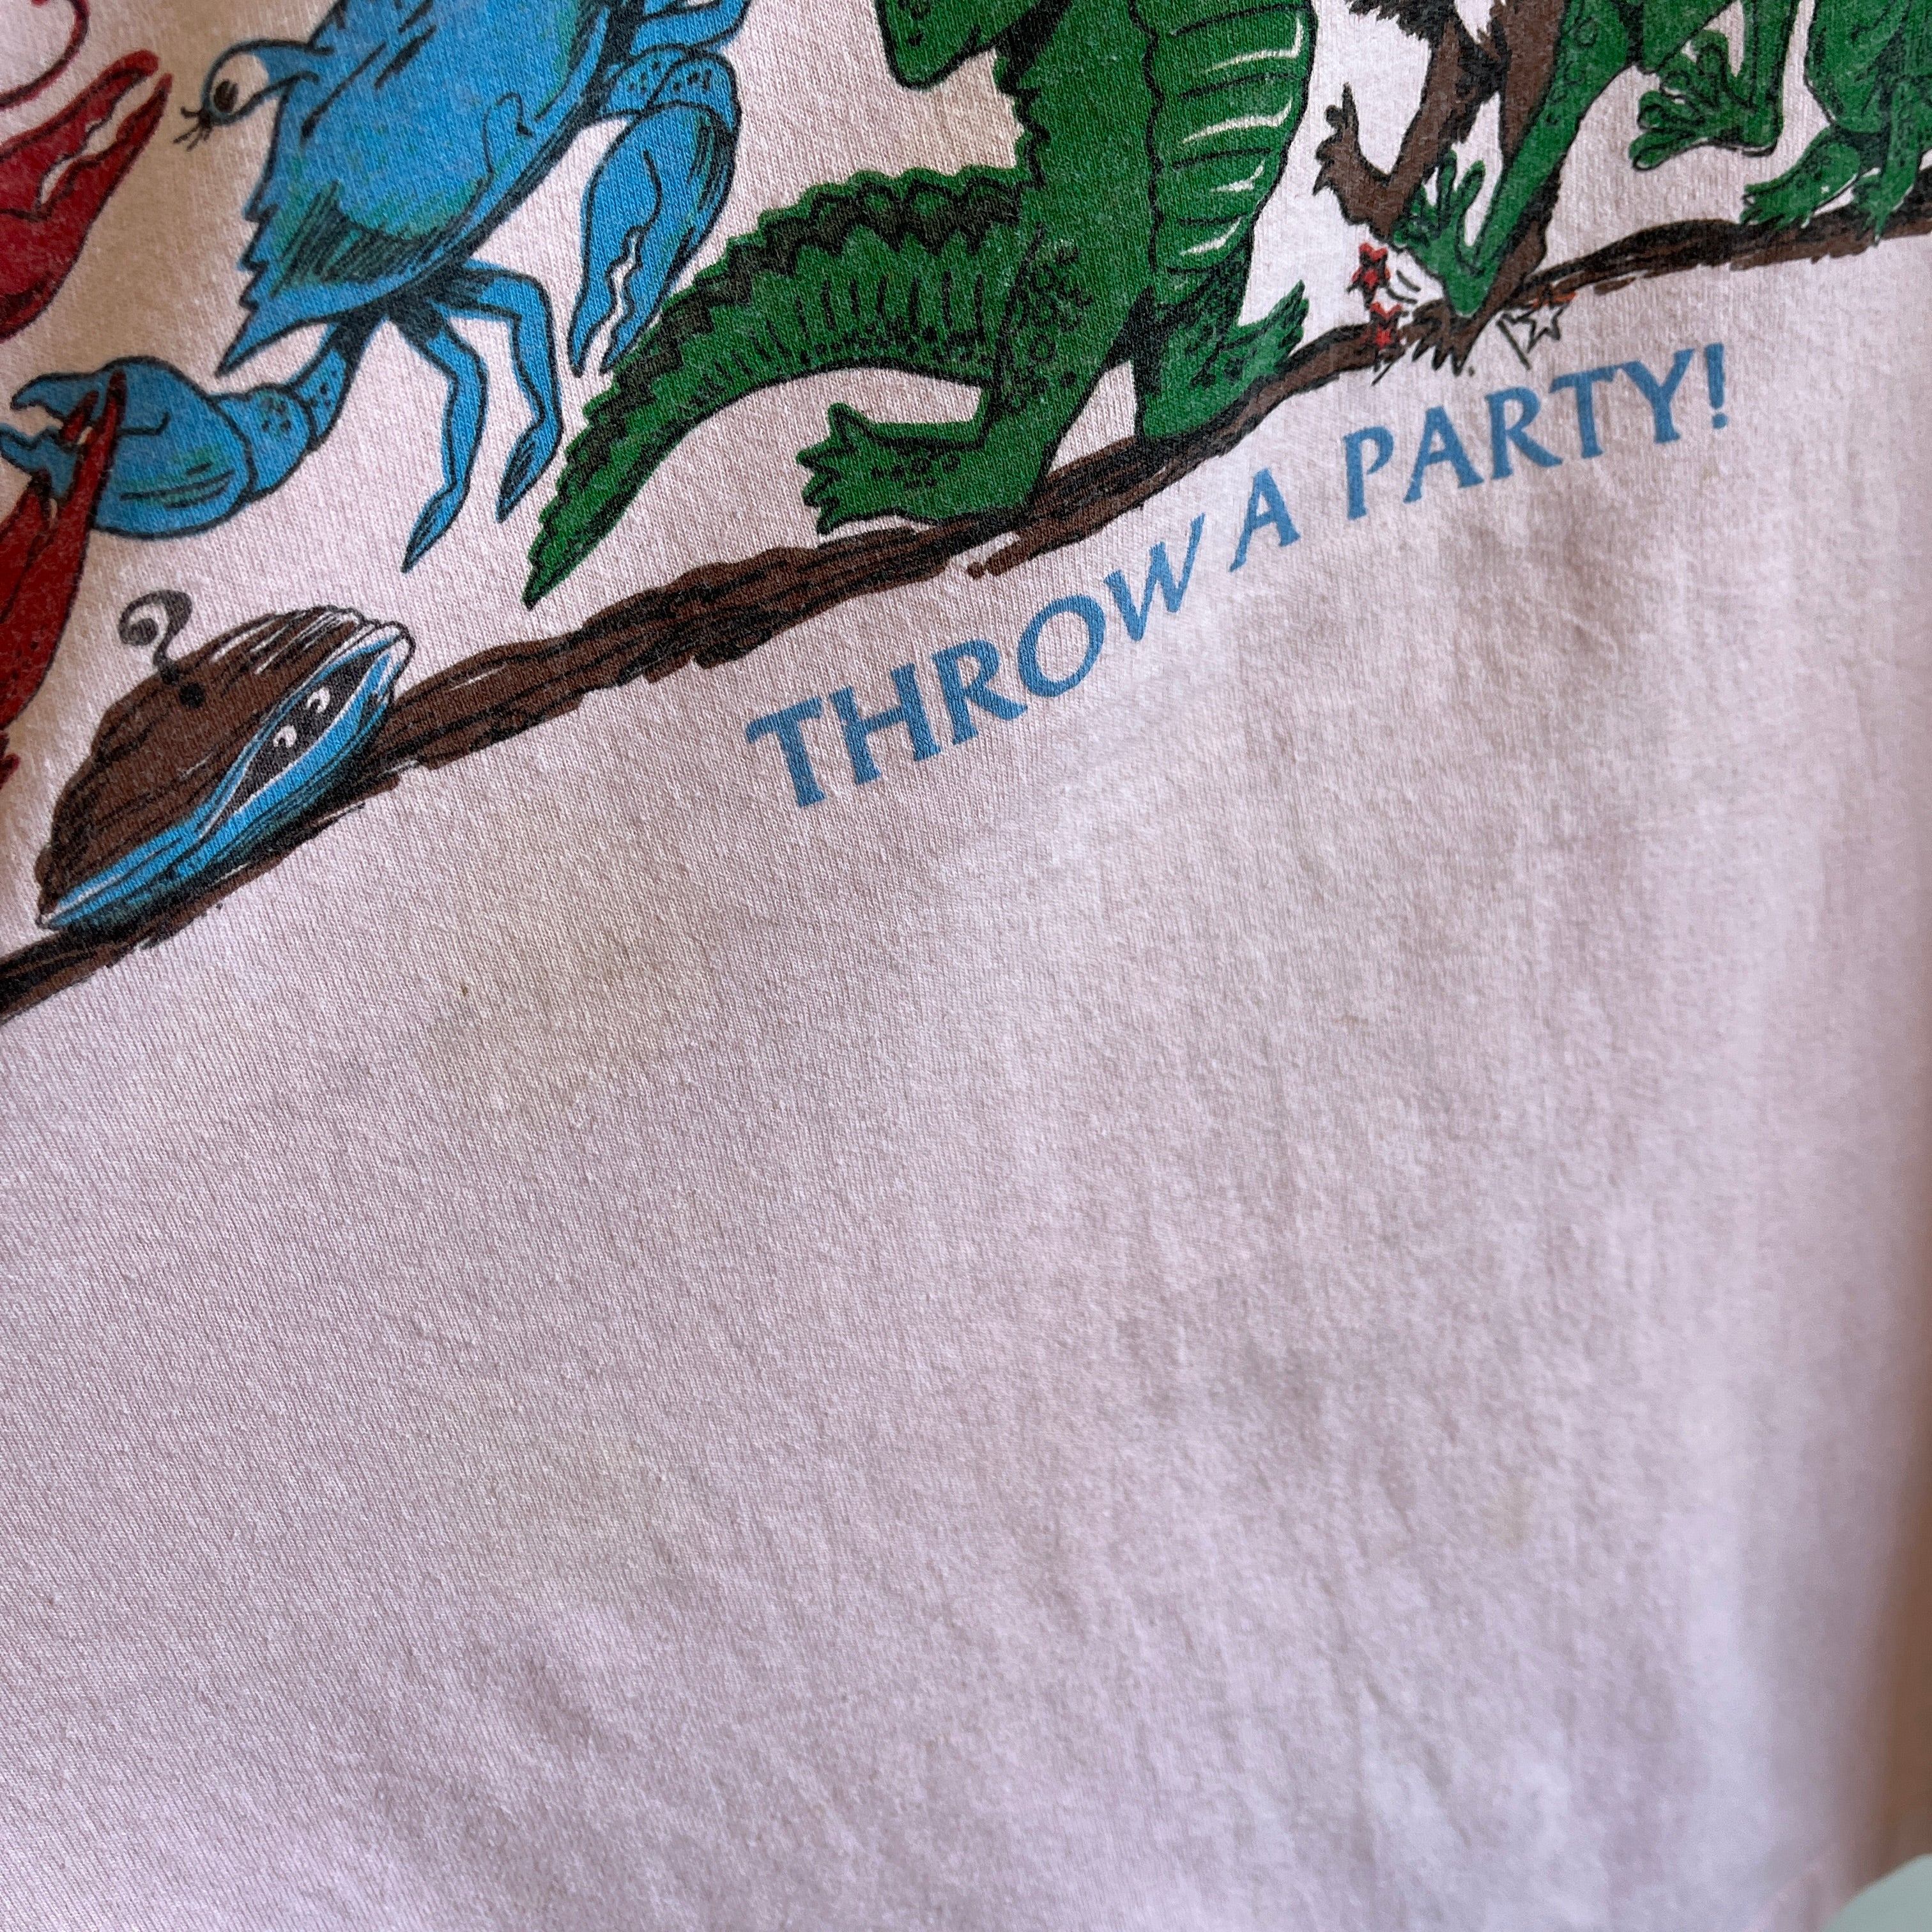 1988 Support Louisiana Wildlife - Throw a Party - Wrap Around T-Shirt – Red  Vintage Co